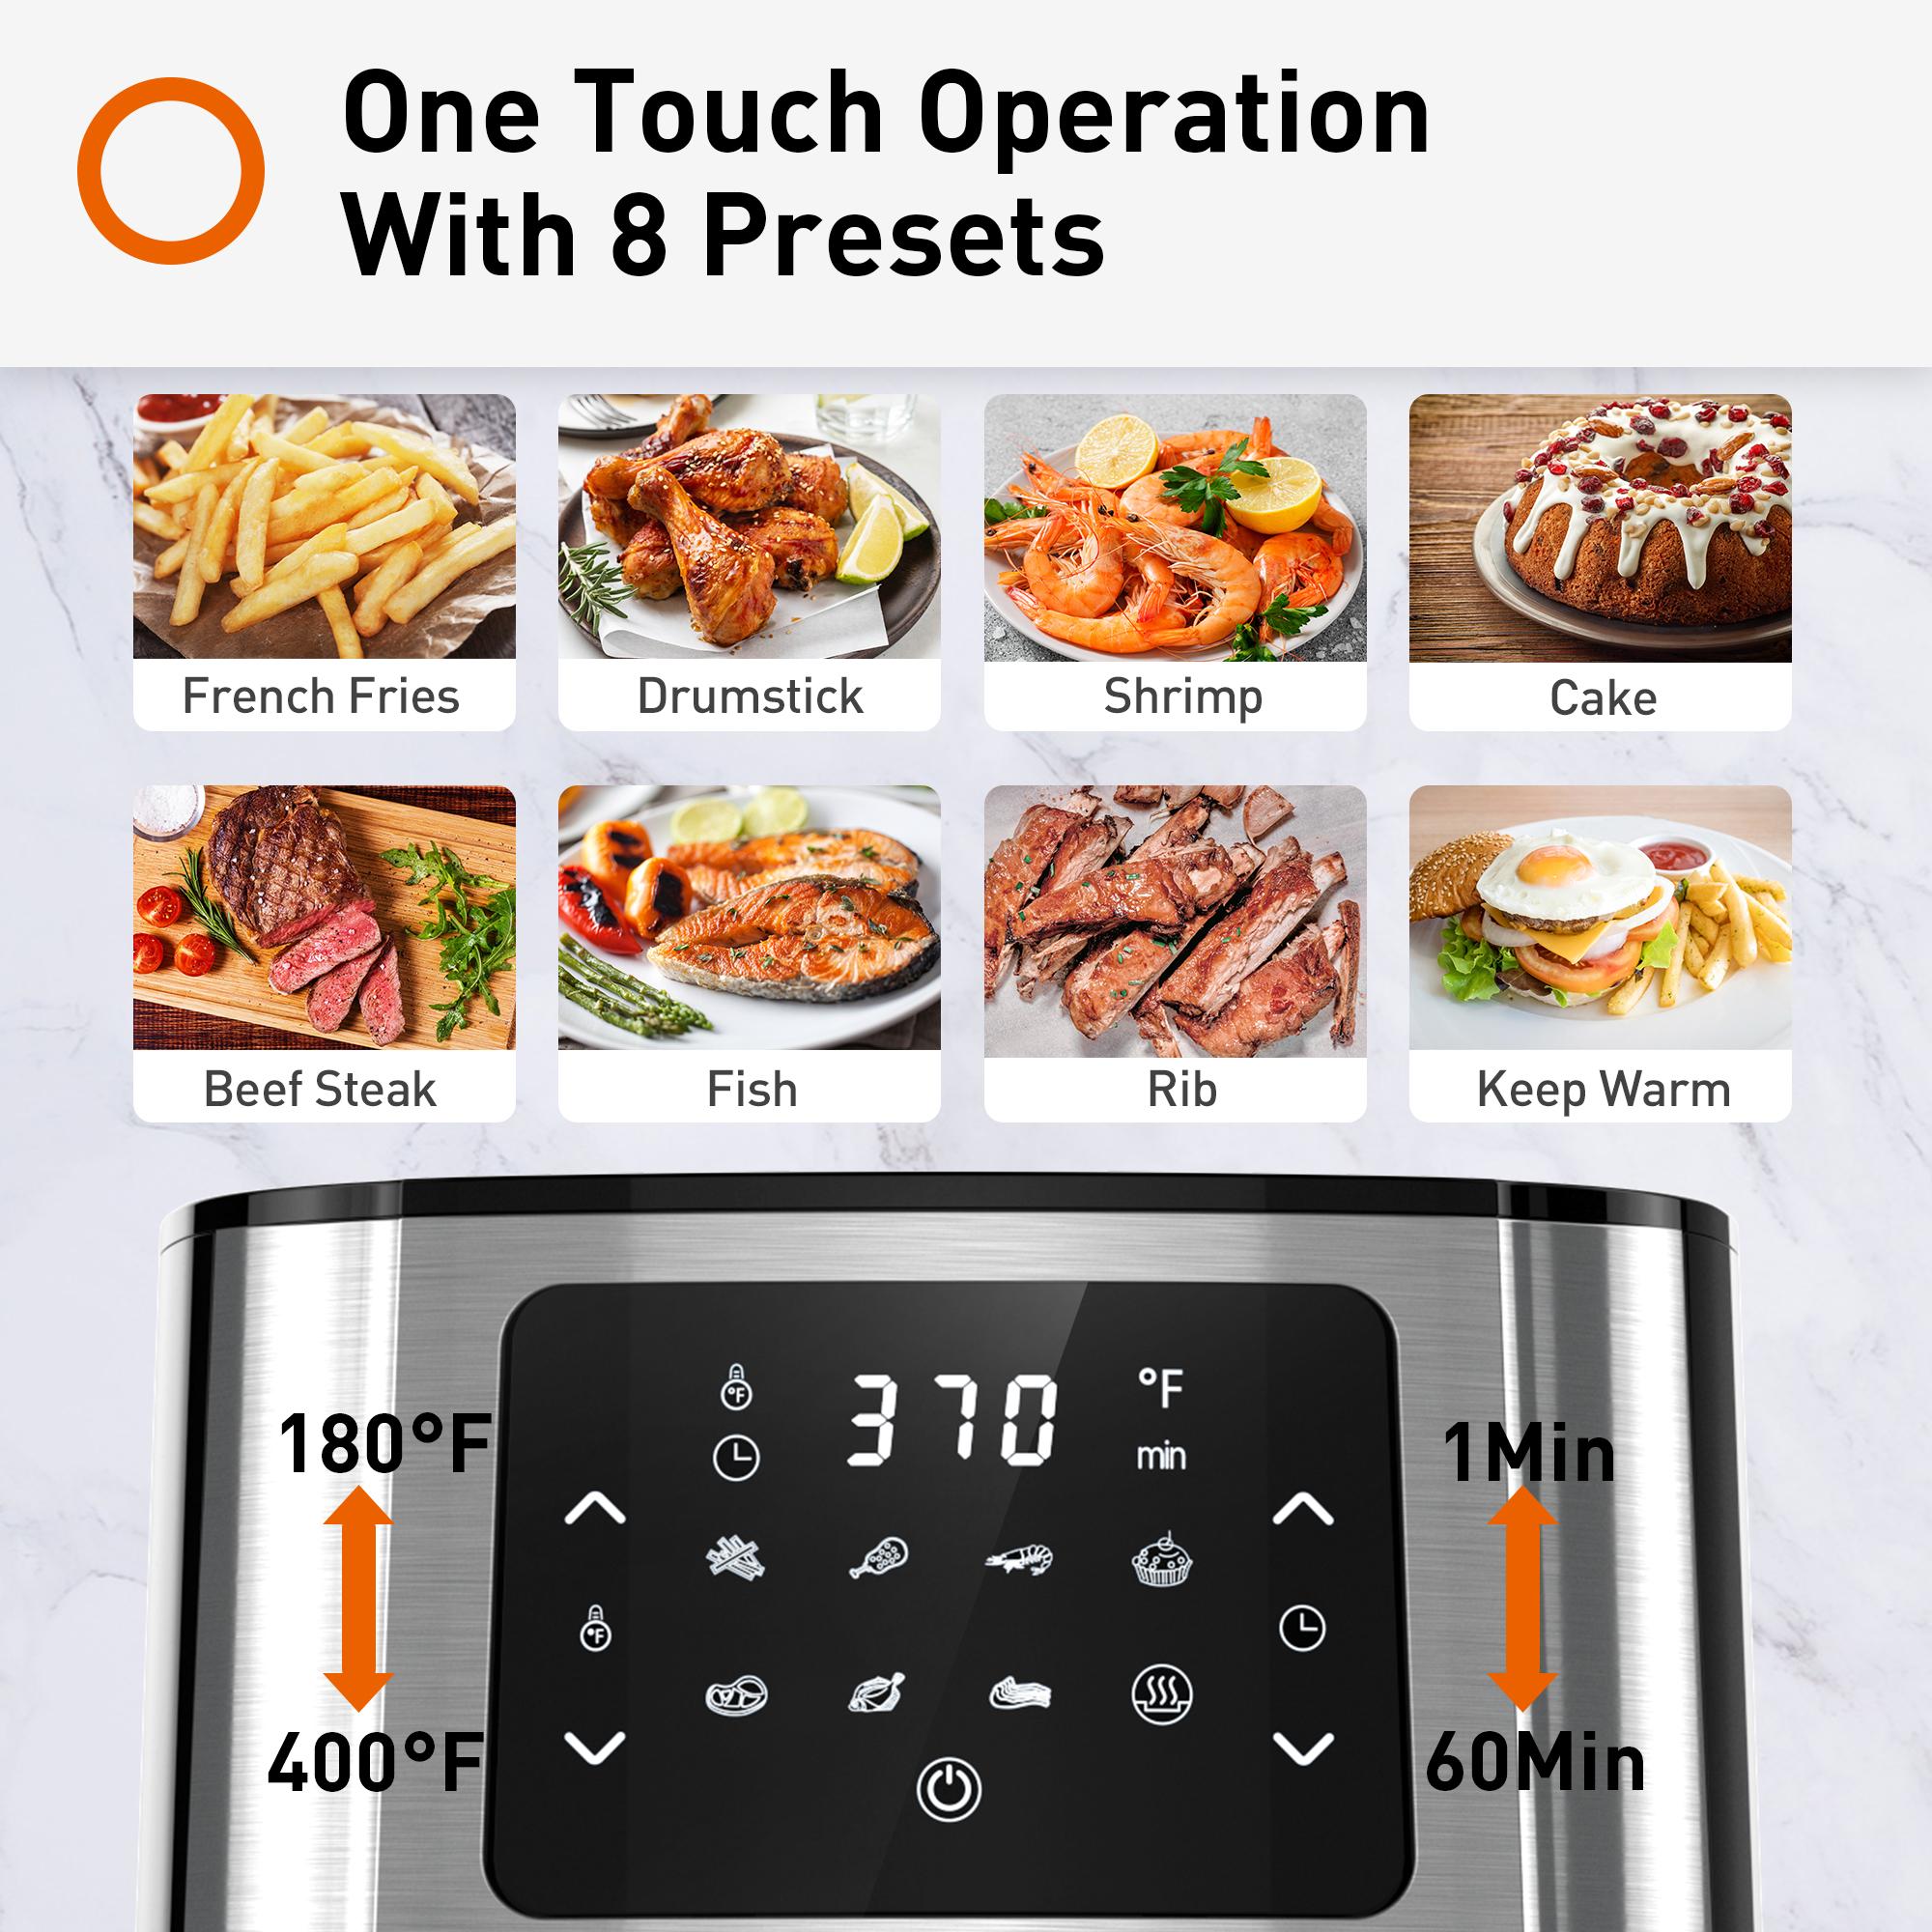 JOYOUNG Air Fryer Oven 5.8Qt Big Capacity Air Fryer Toaster Oven, 8 Presets with AirFryer Cookbook, 1400W, LED Digital Screen,